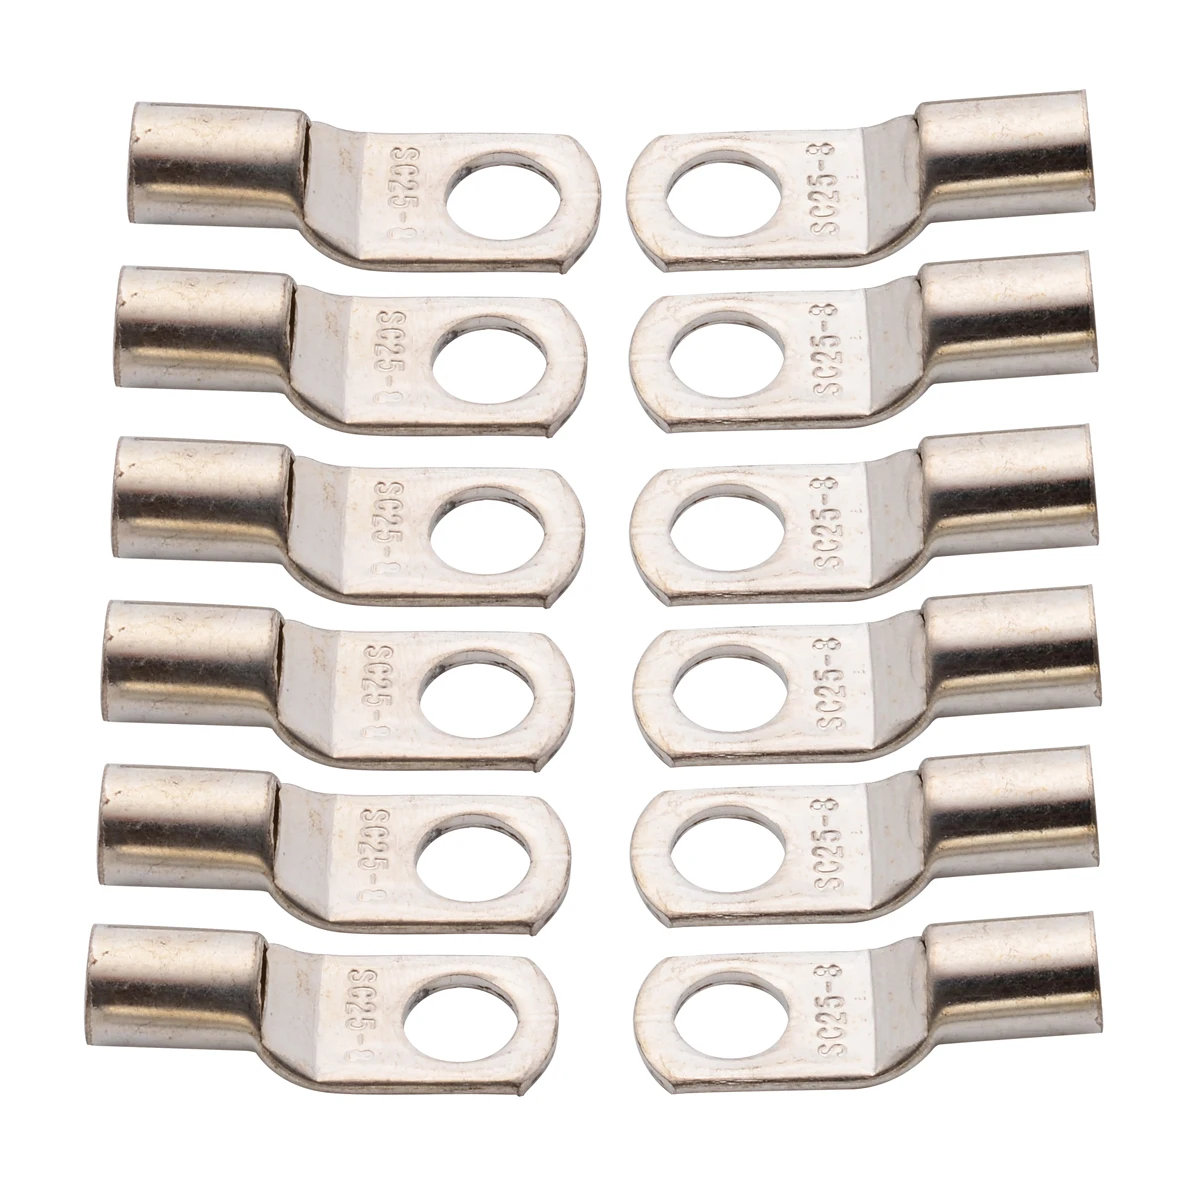 12PCS 25mm2 - 8mm Copper Ring Terminals 3AWG 5/16 inch Hole Wire Battery Terminals Connector Electrical Cable Lugs Eyelet